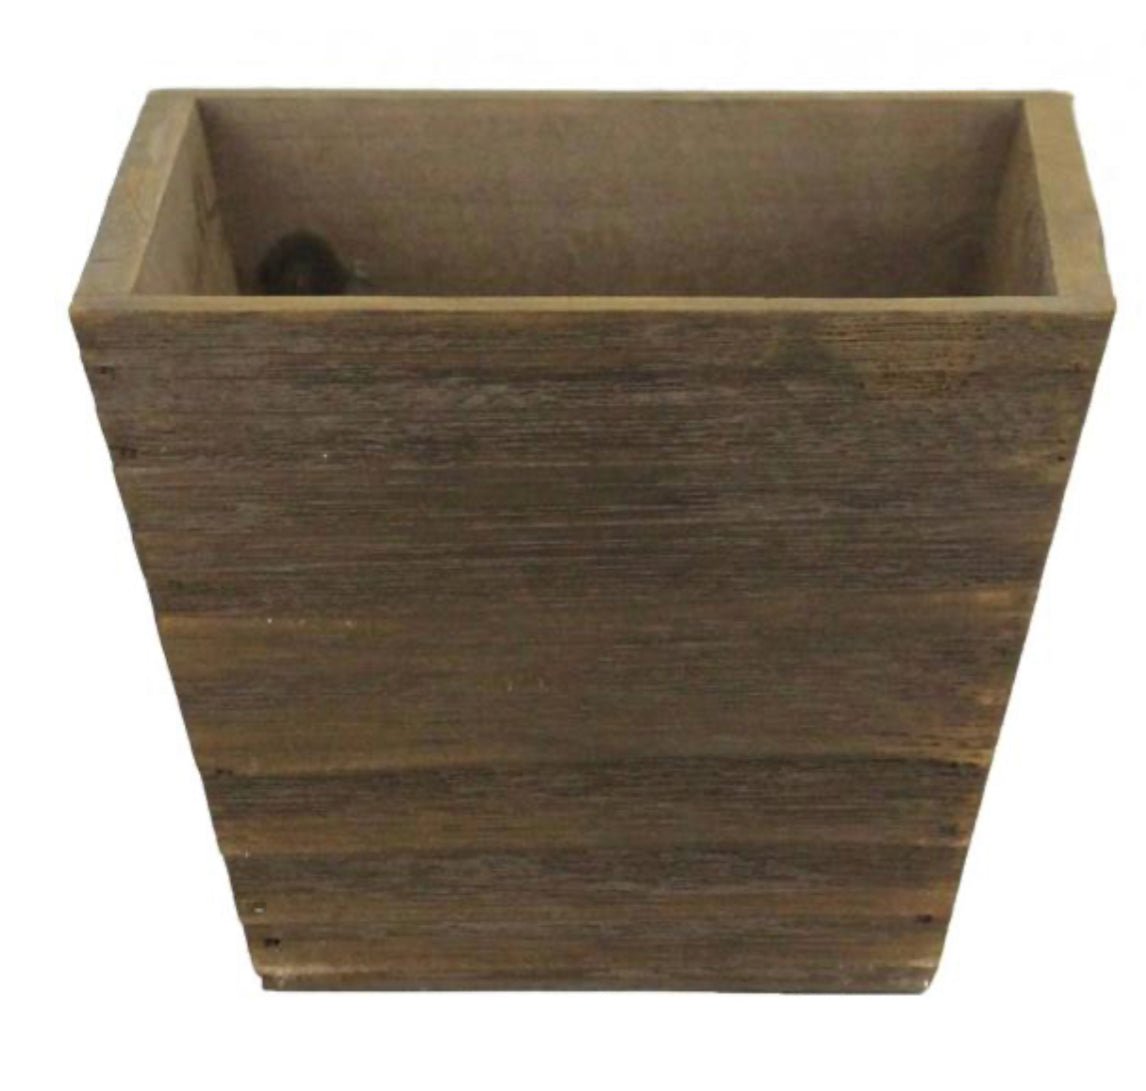 Square tapered wooden containers - brown stain - 6” - Greenery Marketwreath base & containersKm105404